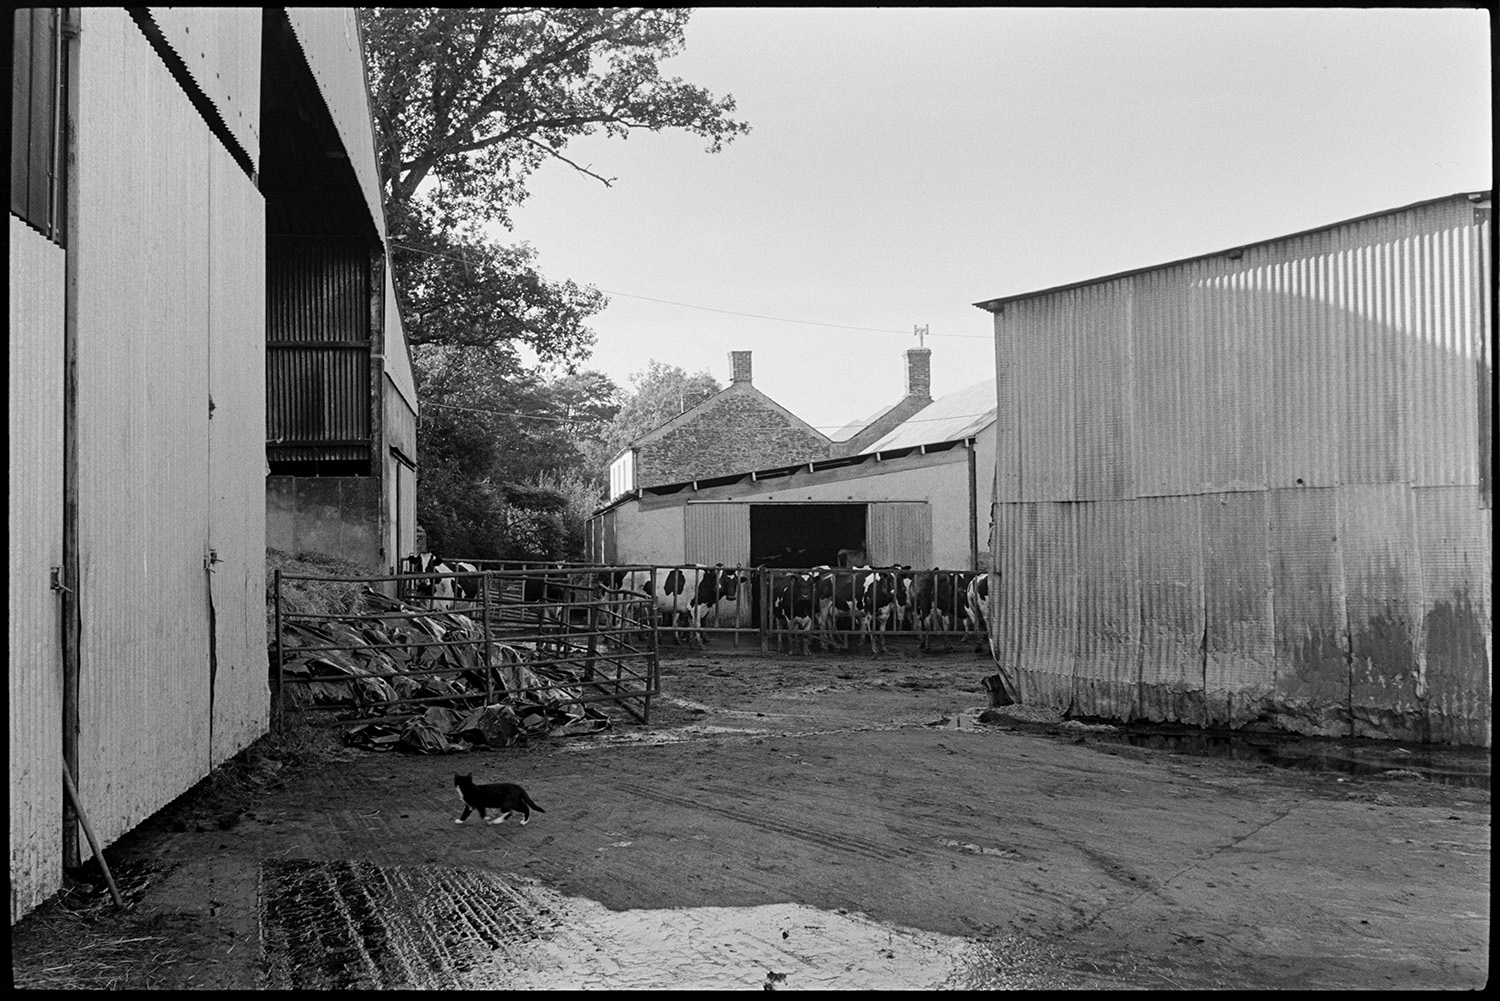 Farmyard, cow and calf. 
[A herd of dairy cows stood by corrugated iron barns in a farmyard near Northlew. A cat is walking past in the foreground.]